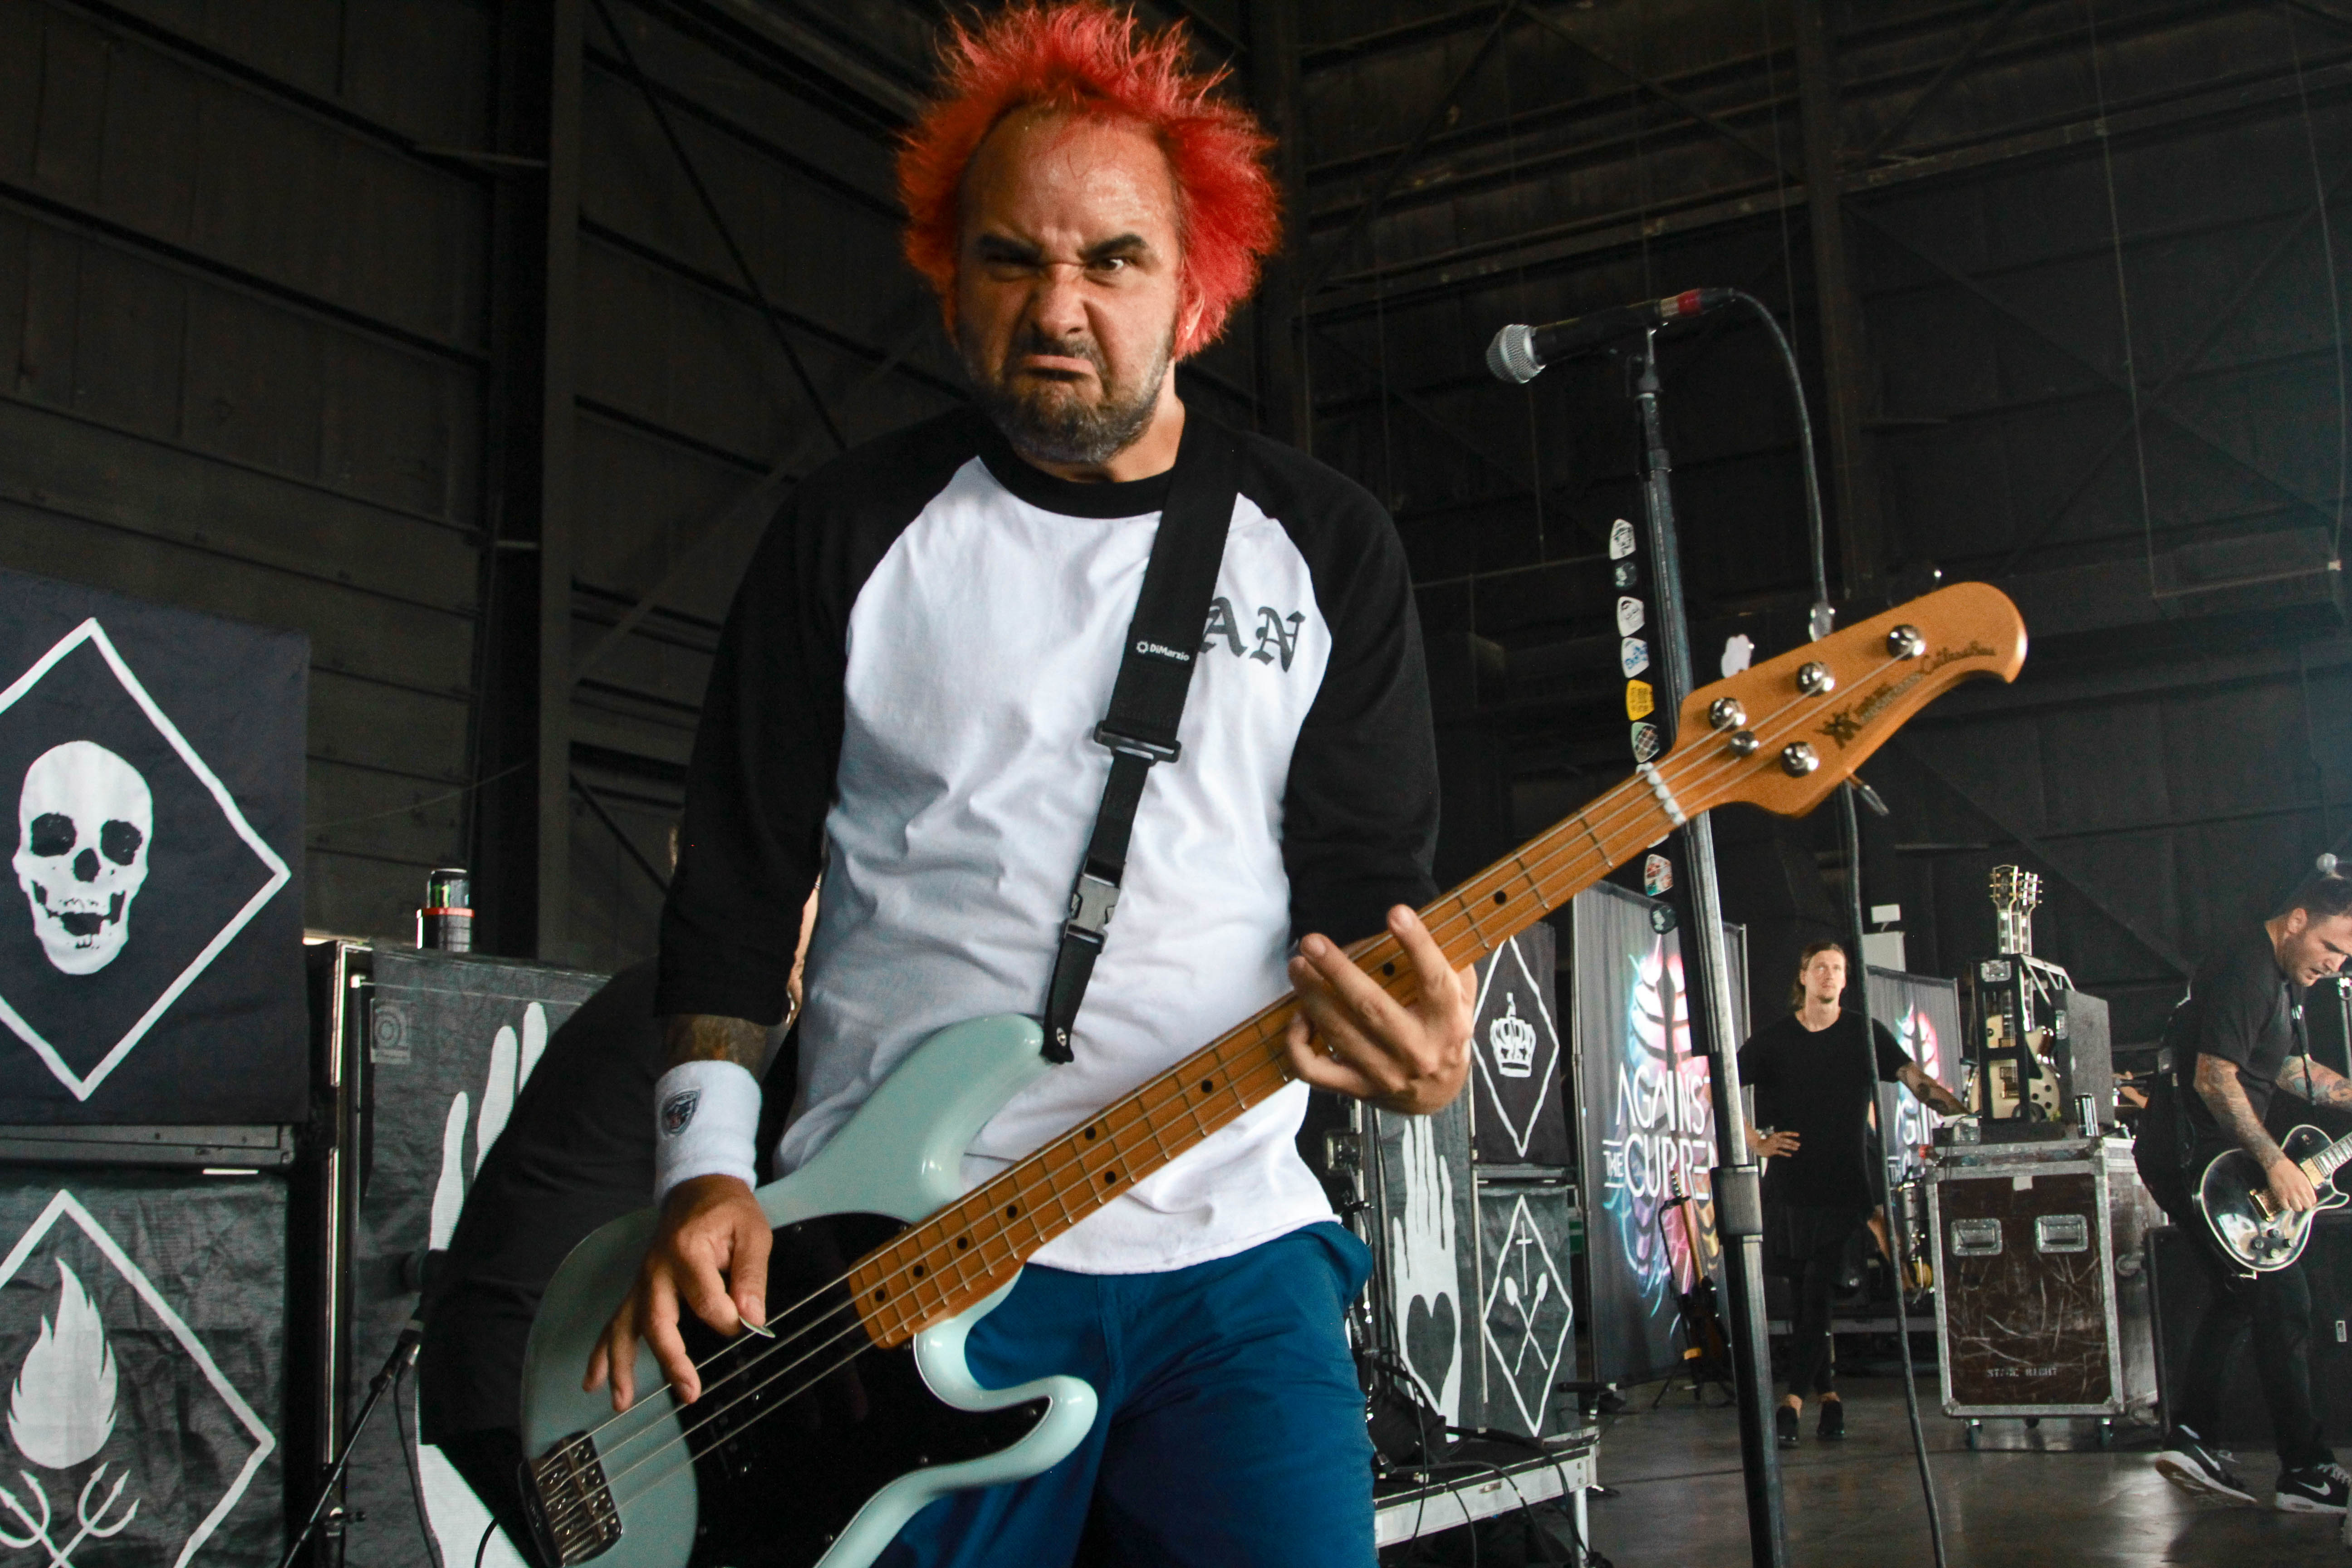 Ian from New Found Glory